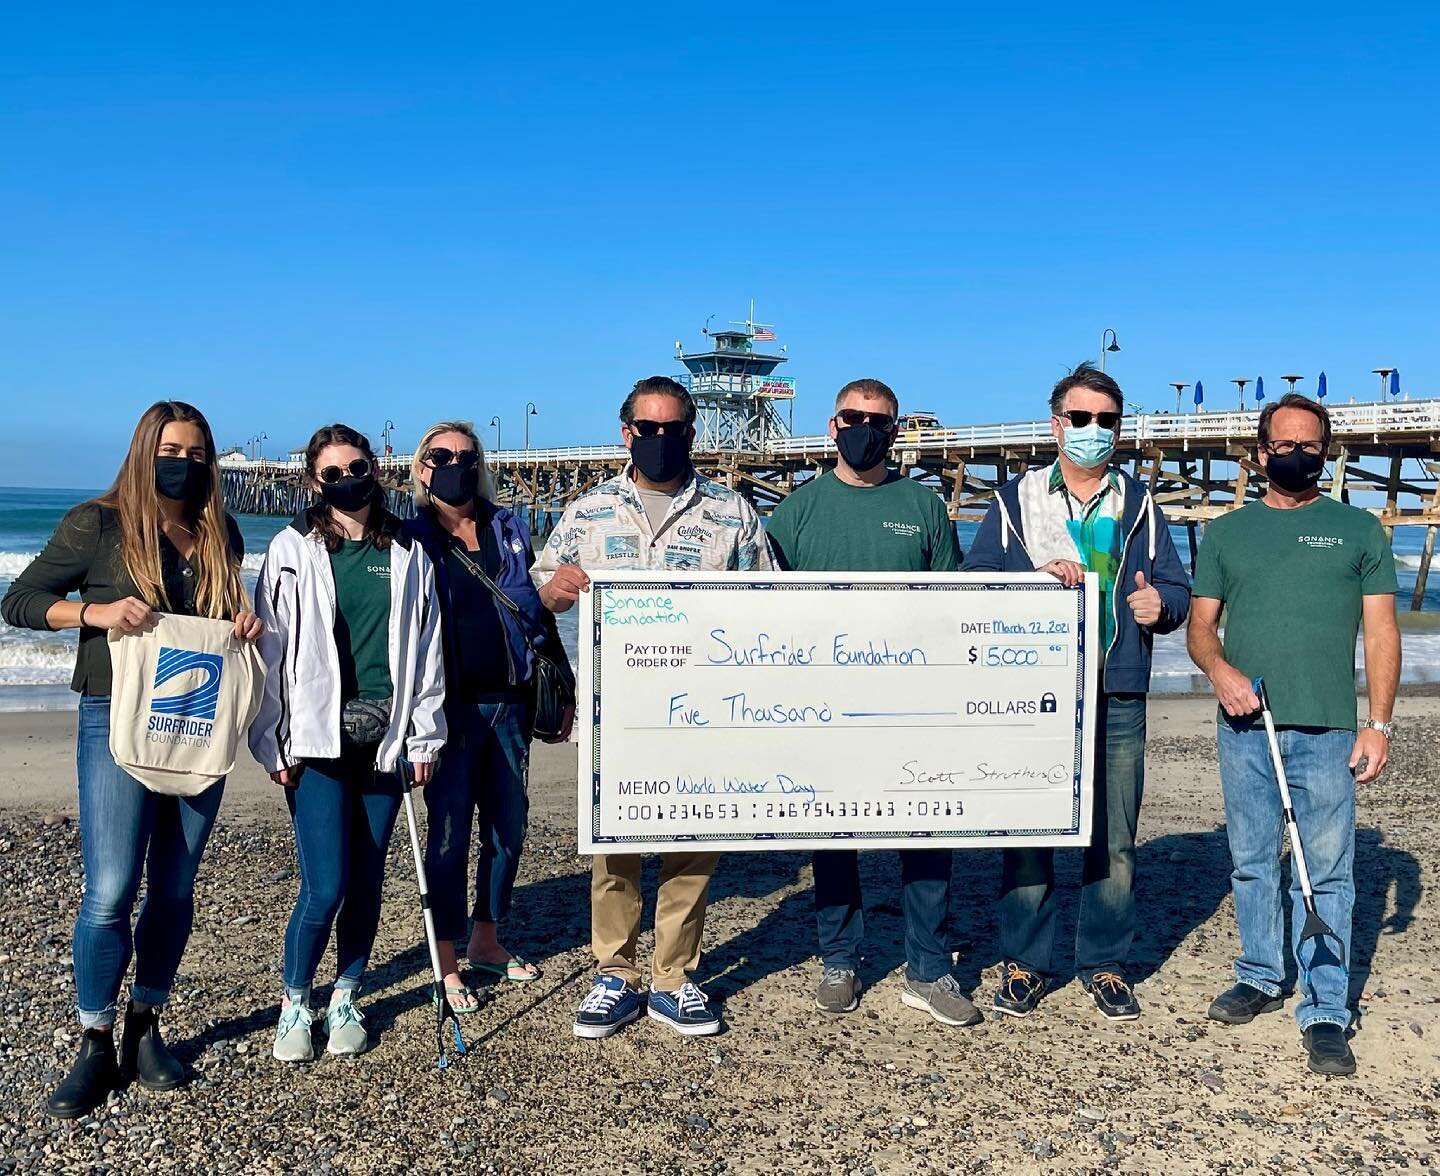 Sonance Foundation believes that protecting our coastal waters is vitally important. That&rsquo;s why on #worldwaterday2021 we granted our local Surfrider chapter $5,000 to help them fight to preserve San Clemente&rsquo;s beaches, waves, and ocean. I